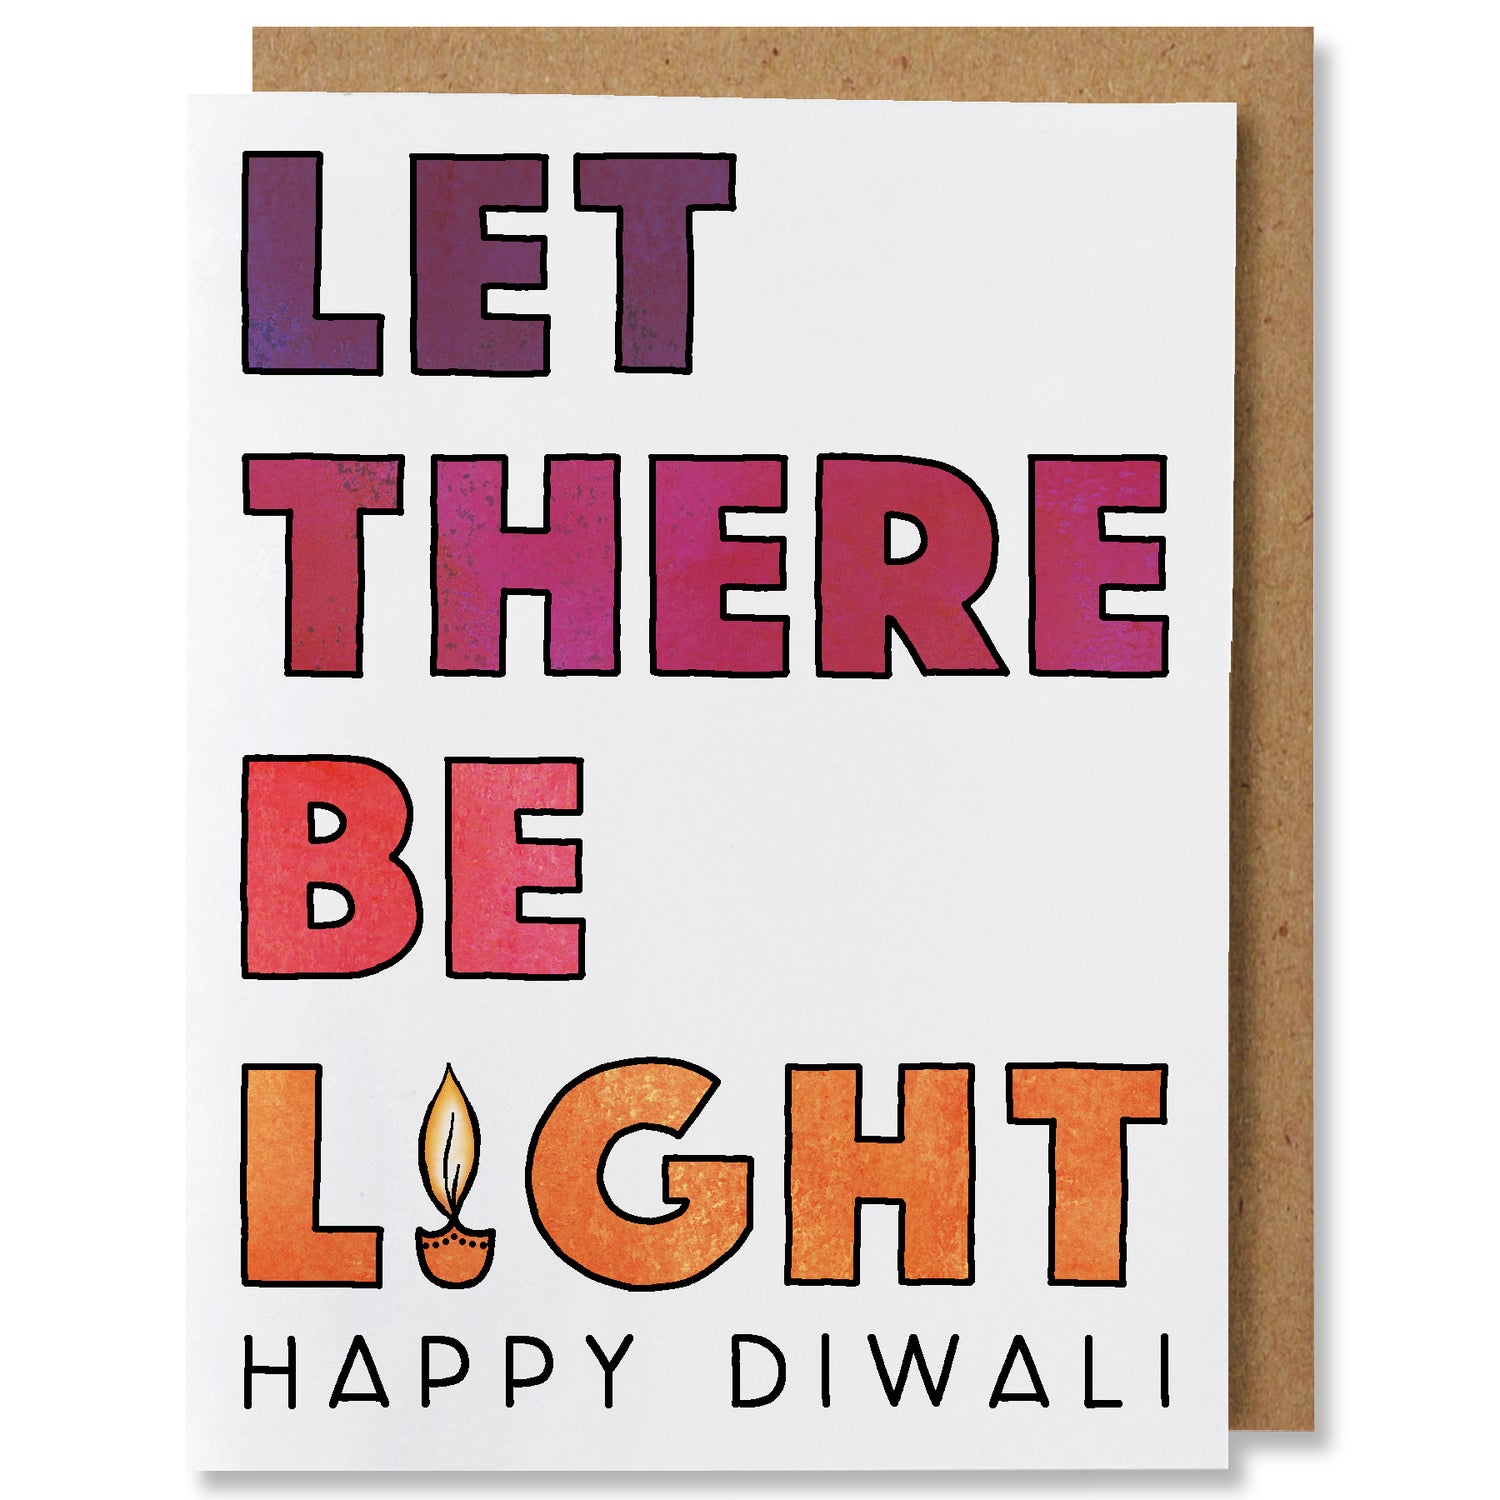 An illustrated card with the caption 'Let there be light' starting in purple and transitioning with each word to the colors dark pink, pink, and orange. The 'i' in light is a small candle with a lit flame. At the bottom the card reads 'Happy Diwali'